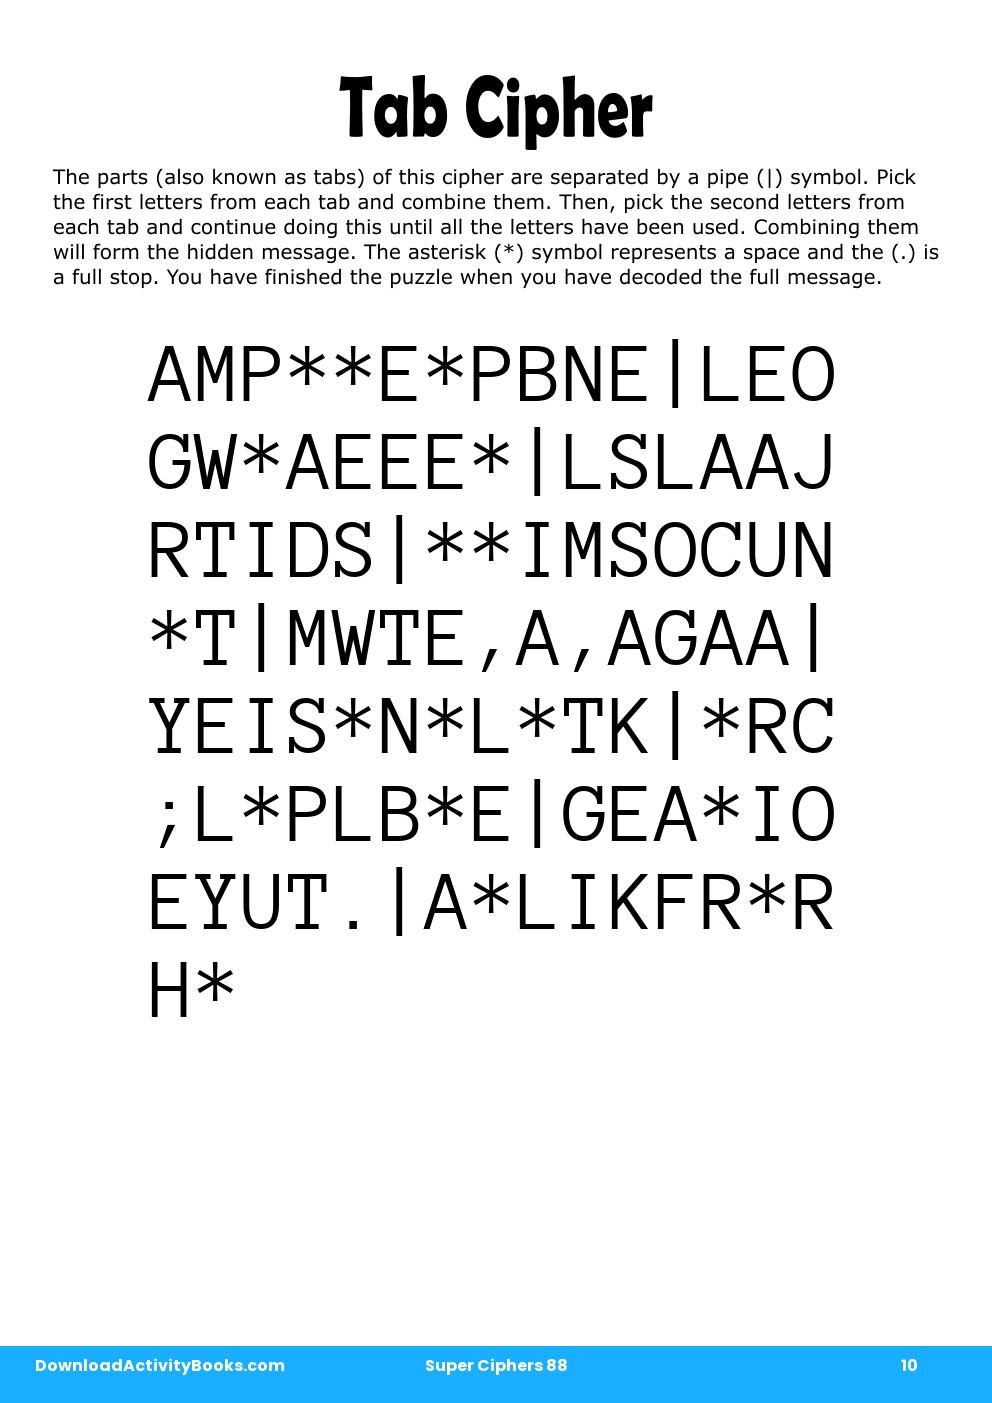 Tab Cipher in Super Ciphers 88